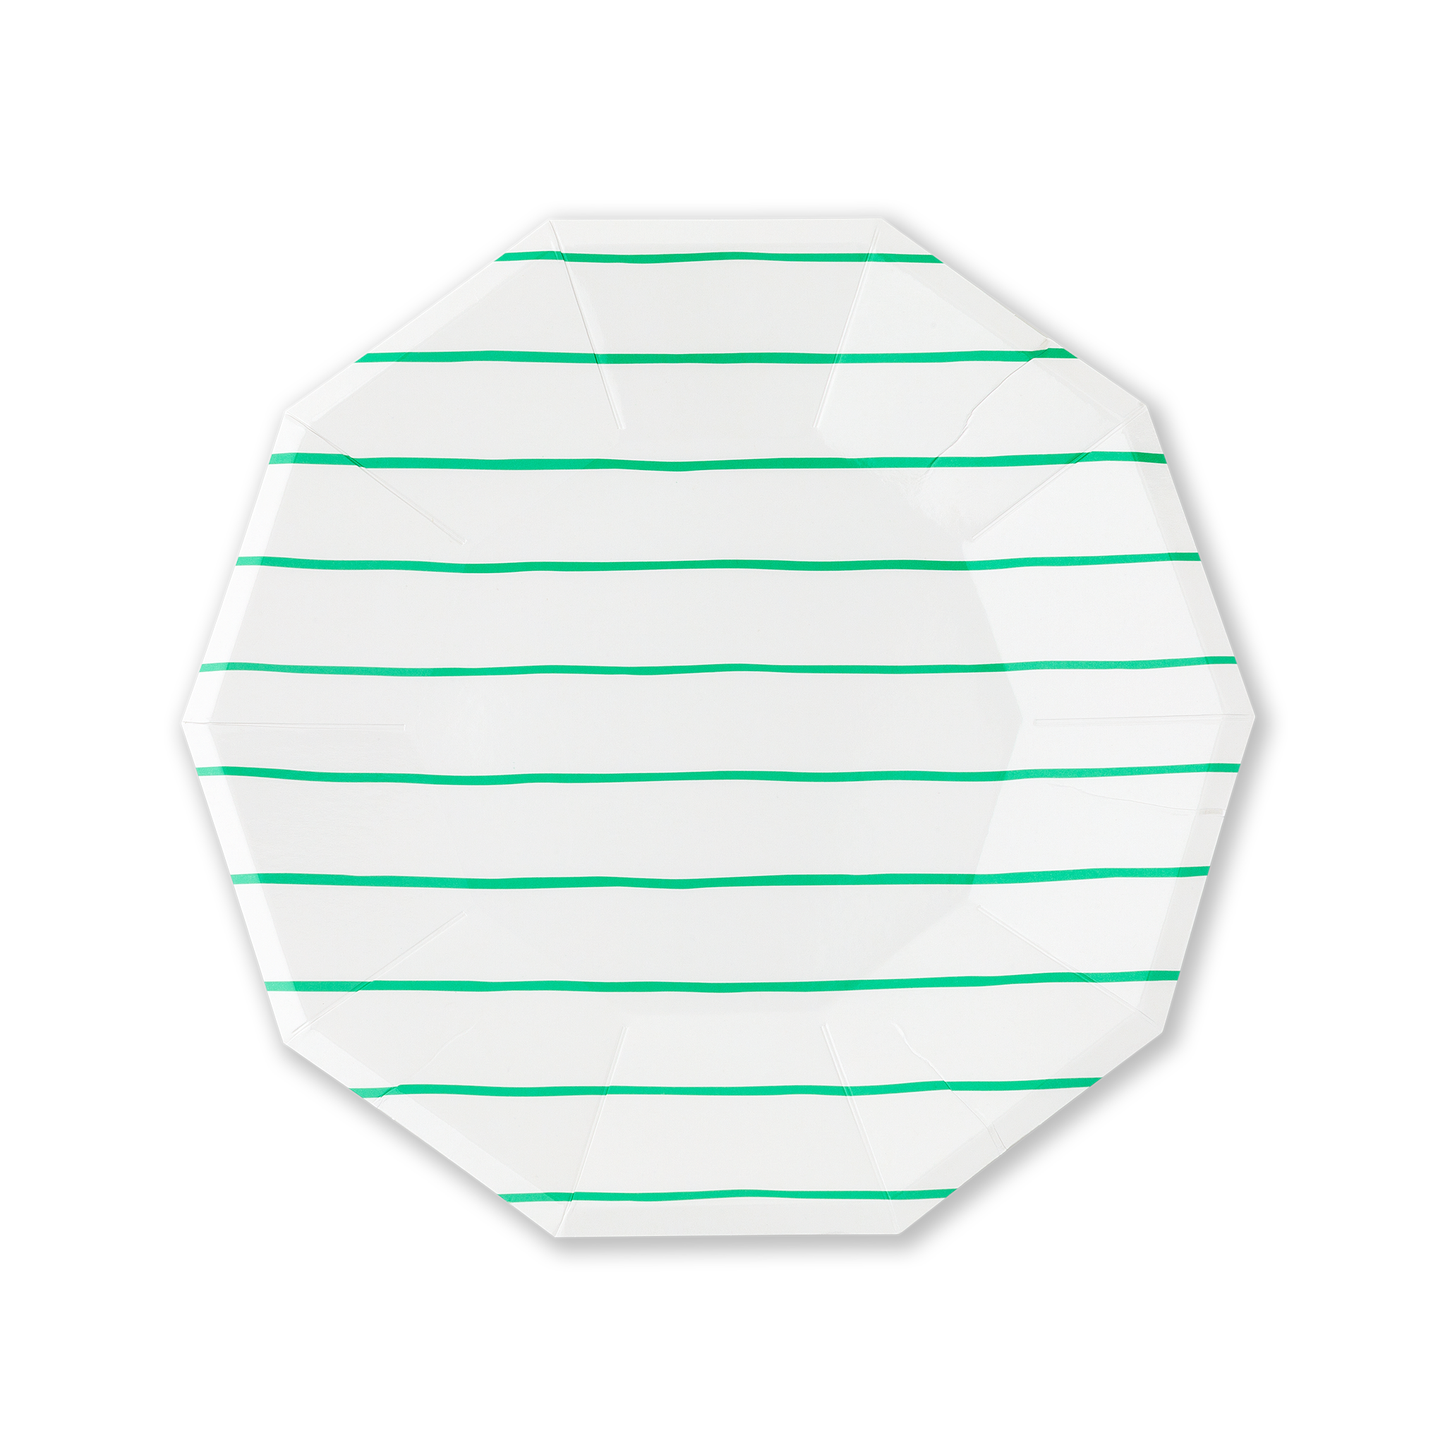 Frenchie Striped Clover Plates - 2 Size Options - 8 Pk.